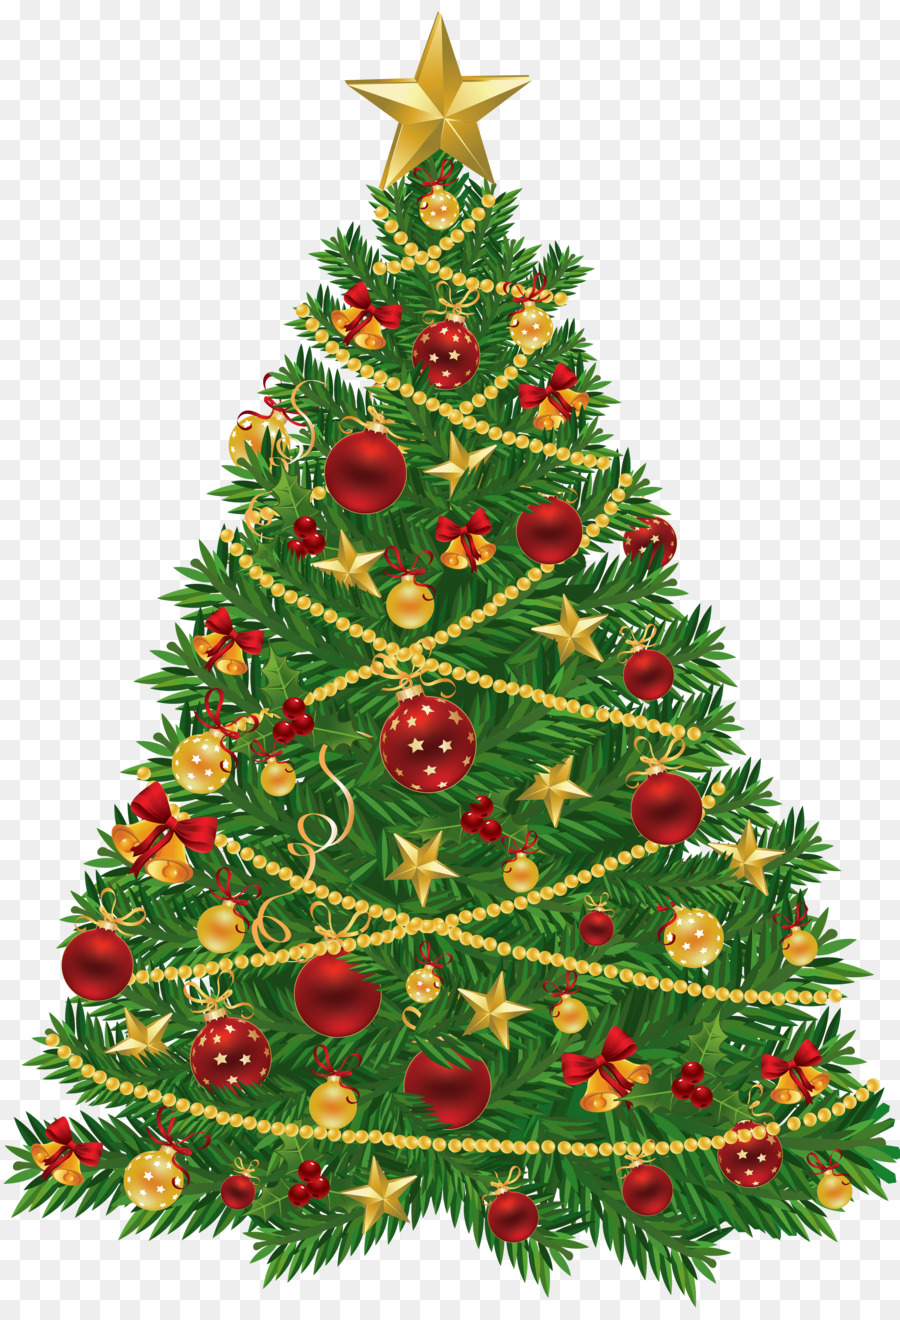 Christmas tree Christmas ornament Clip art - Christmas Ornaments Cliparts png download - 4400*6422 - Free Transparent Christmas Tree png Download.